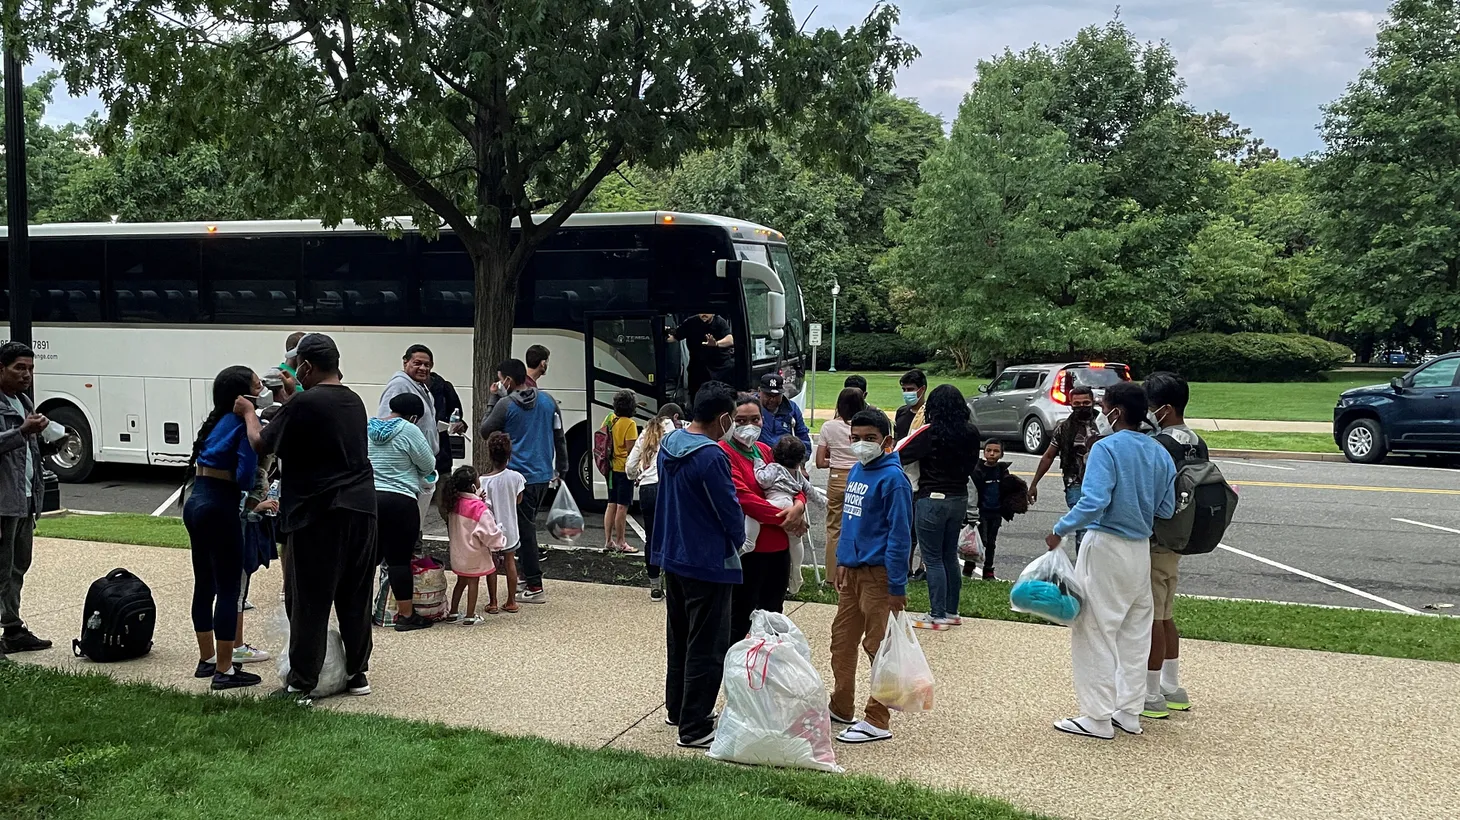 Approximately 30 migrants disembark after arriving on a bus from Texas, at Union Station near the U.S. Capitol in Washington, U.S., July 29, 2022.